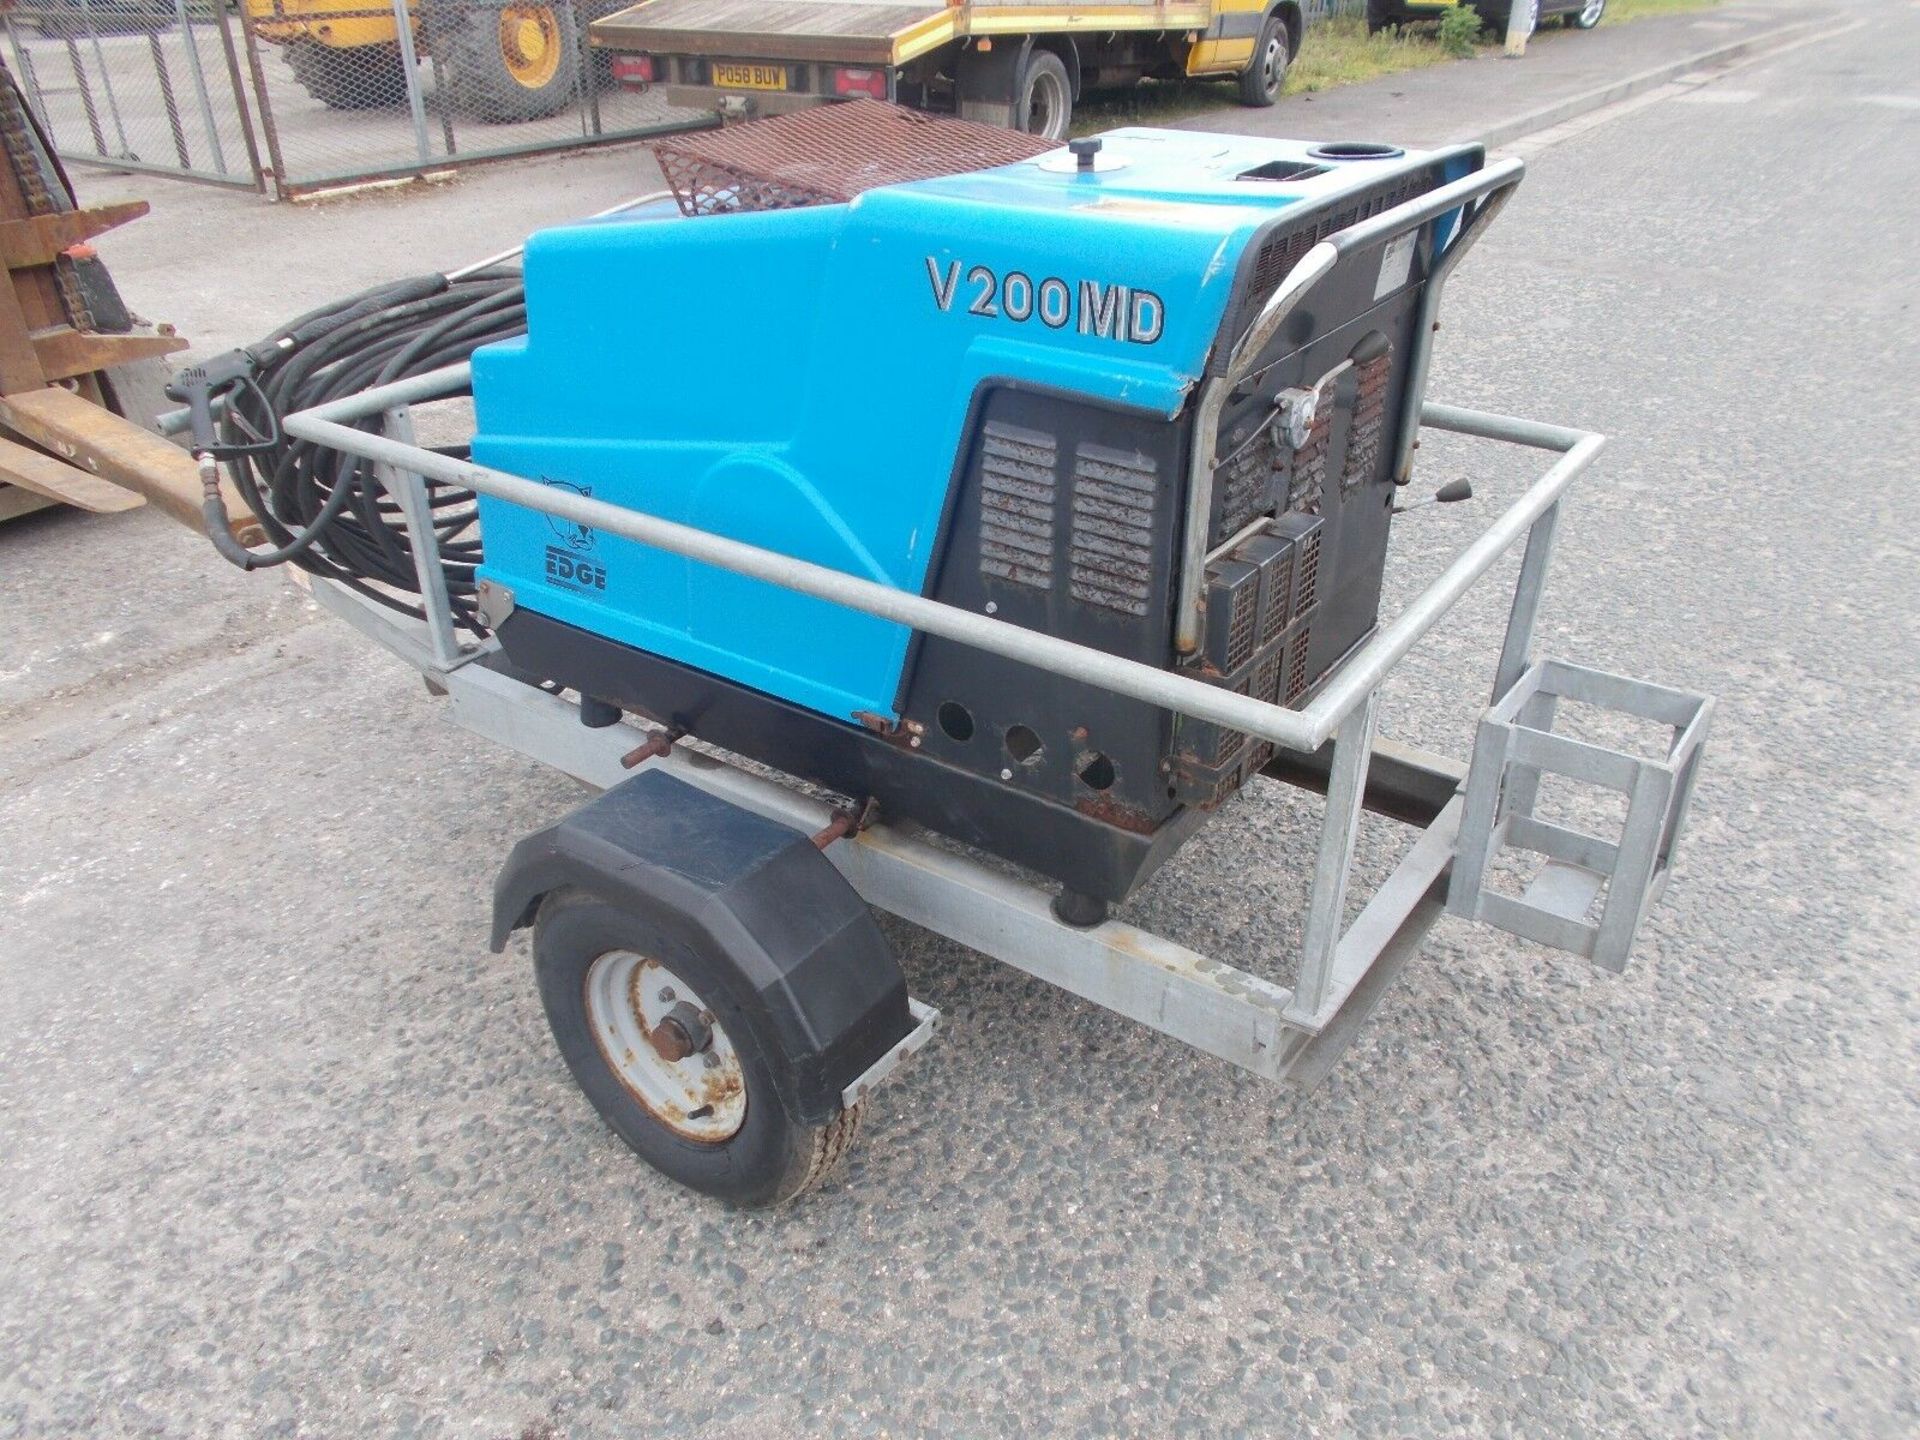 Edge V 200 MD Towable Hot and Cold Diesel Engined Pressure Washer - Image 4 of 7